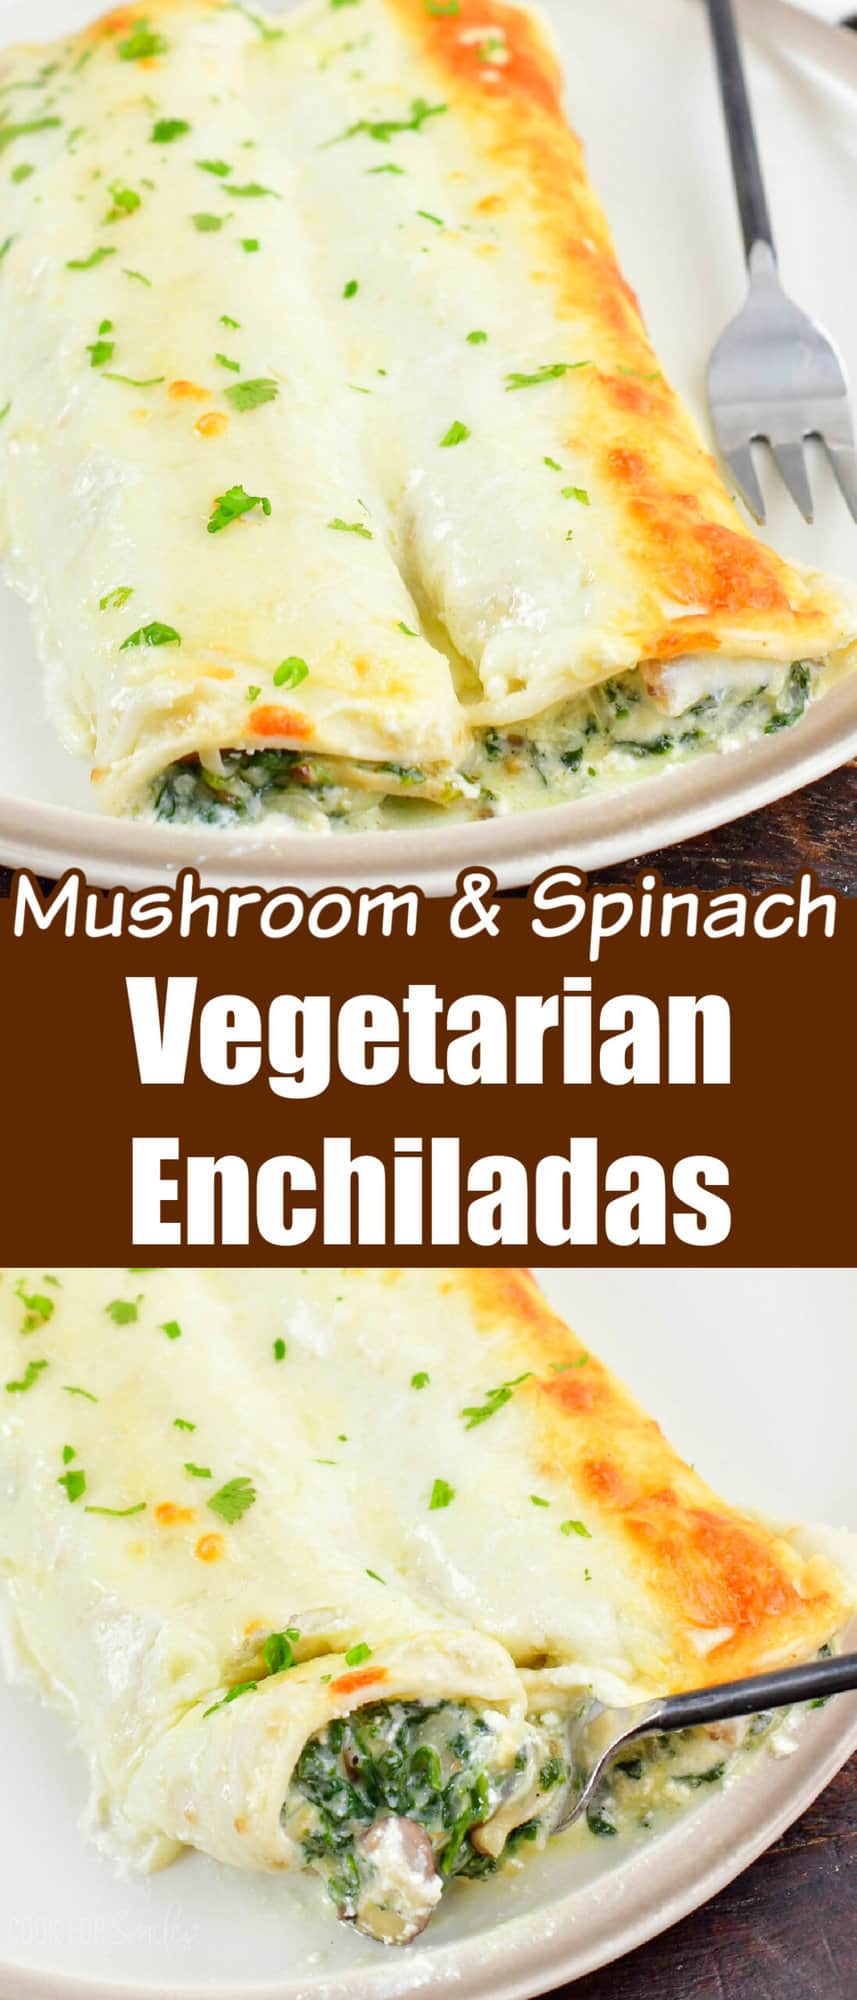 two images of two spinach vegetarian enchiladas.